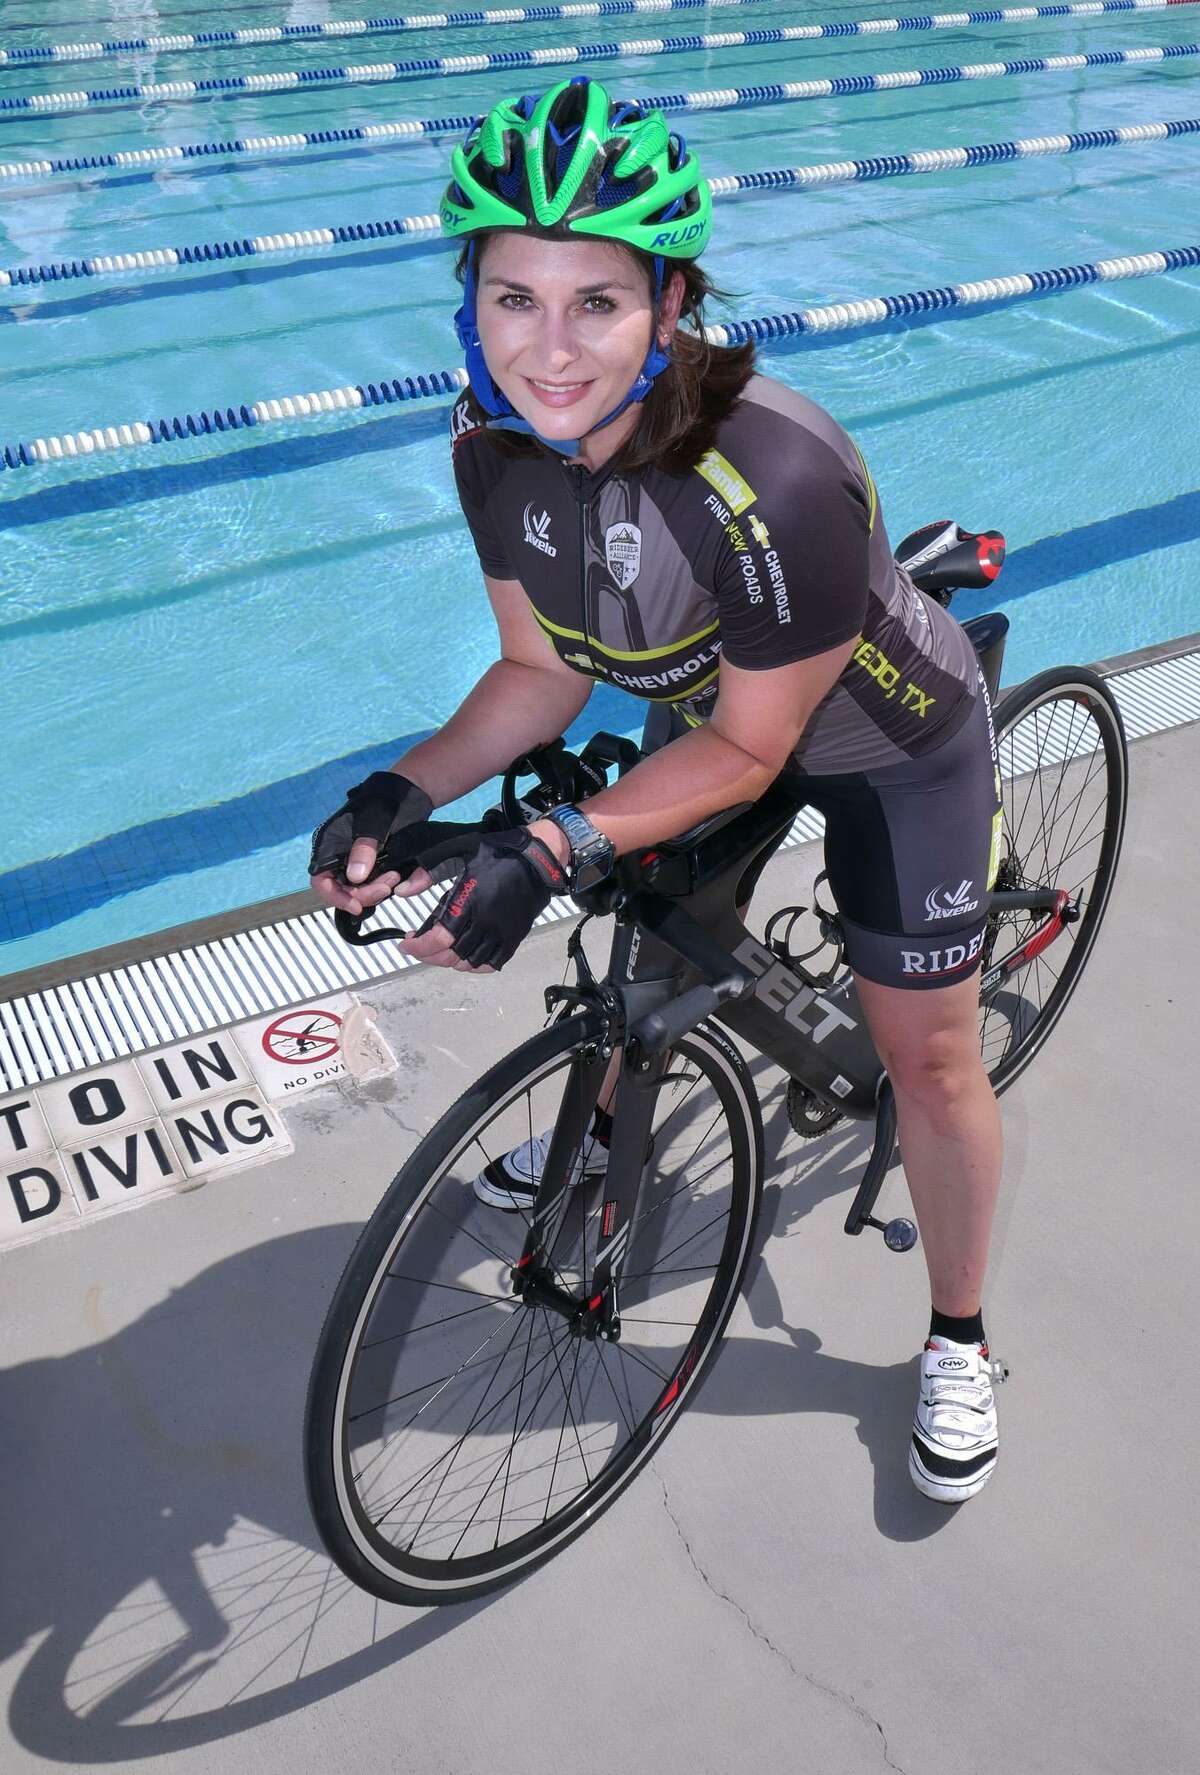 Triathlete Jodee Gamez competes in triathalons and races of kinds